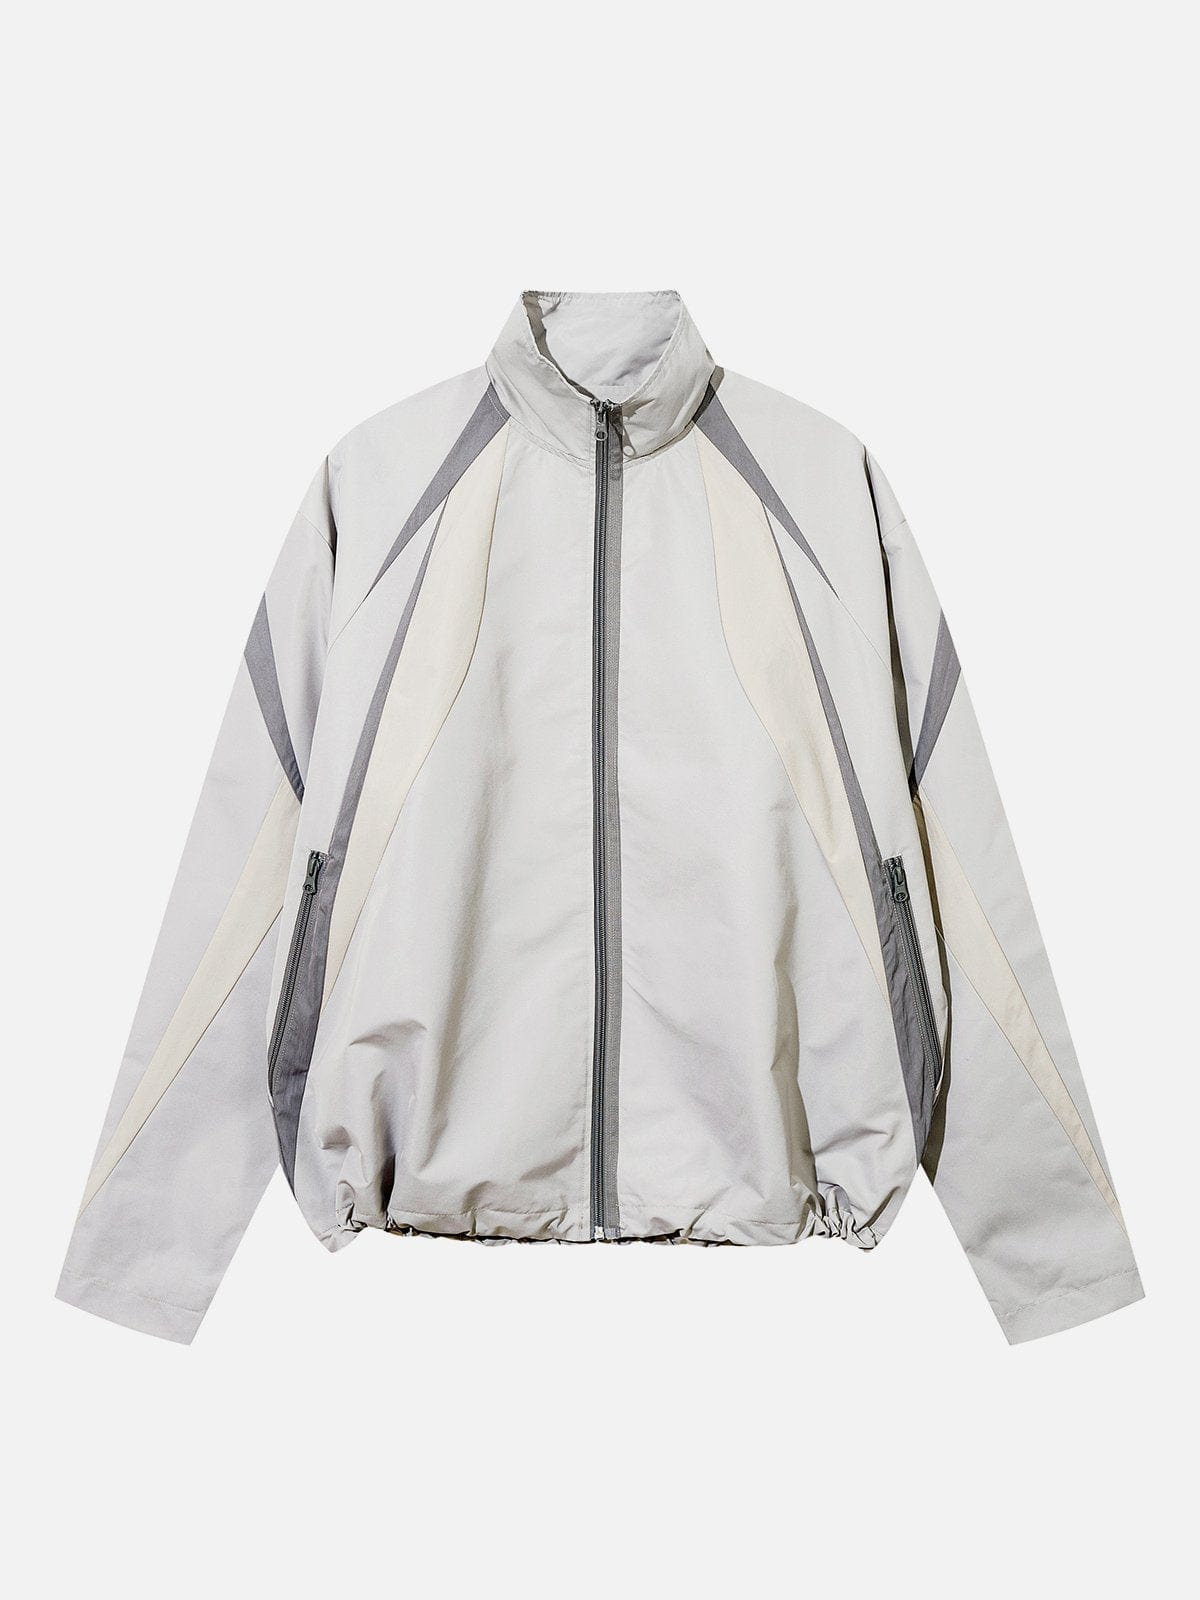 NEV Windproof Material Splicing Jacket